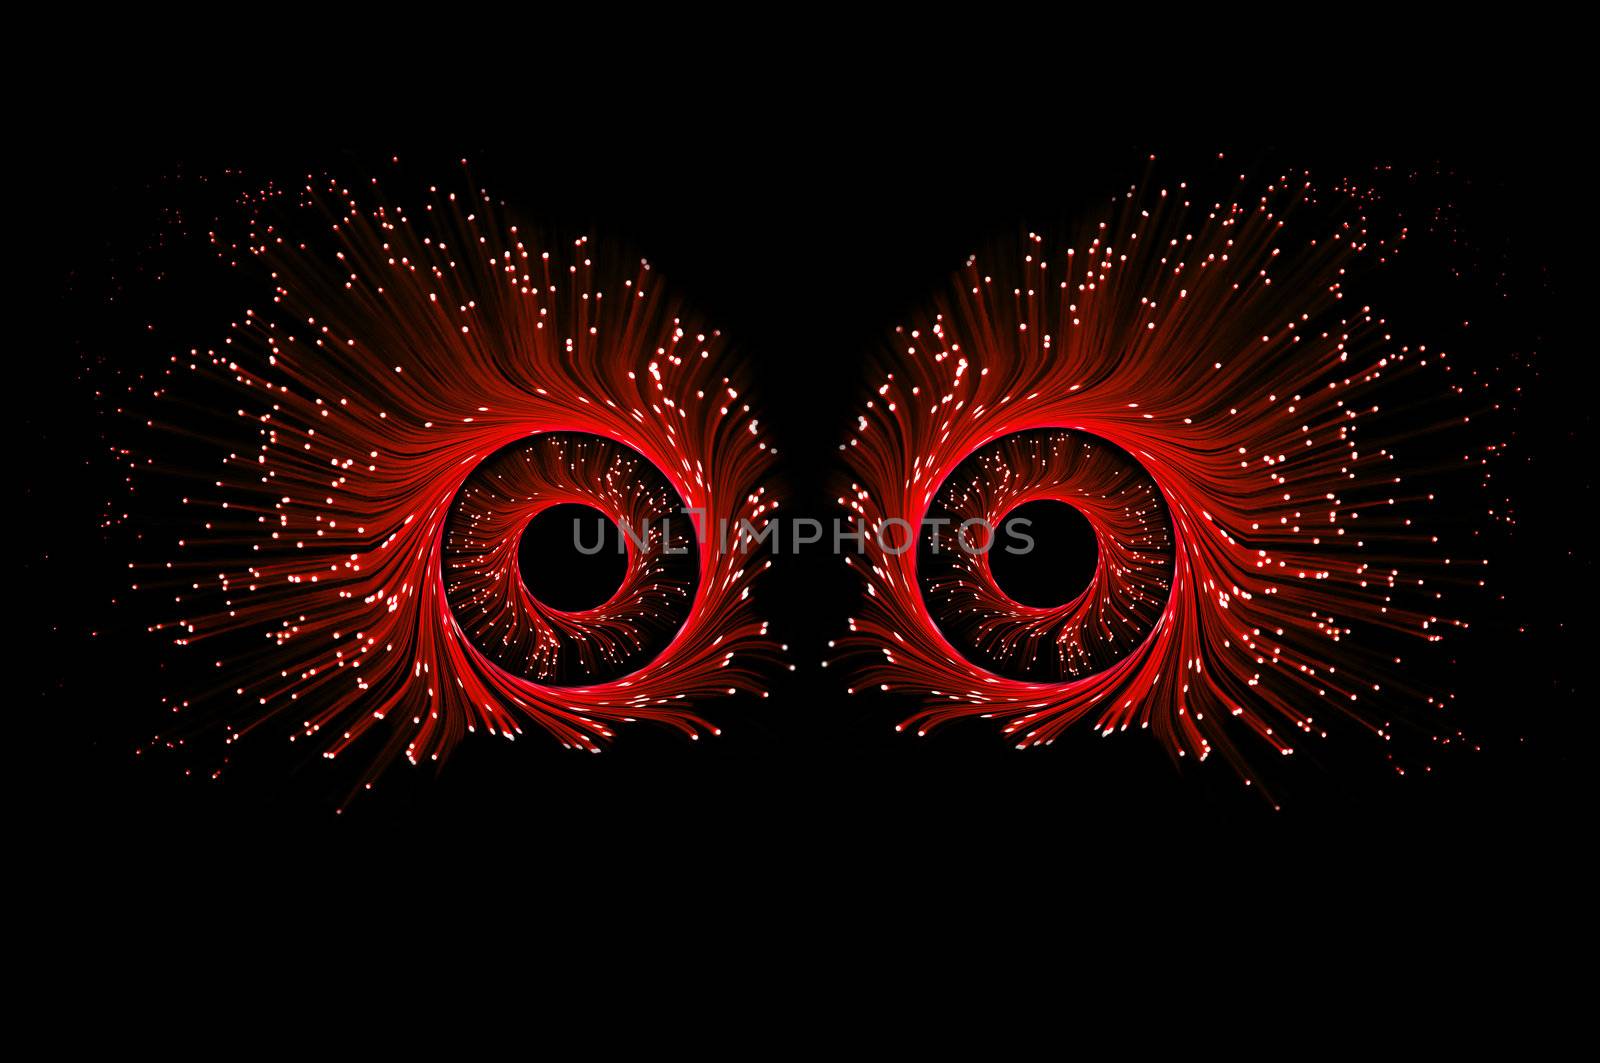 Two eyes composed from many illuminated red fibre optic light strands against a black background.